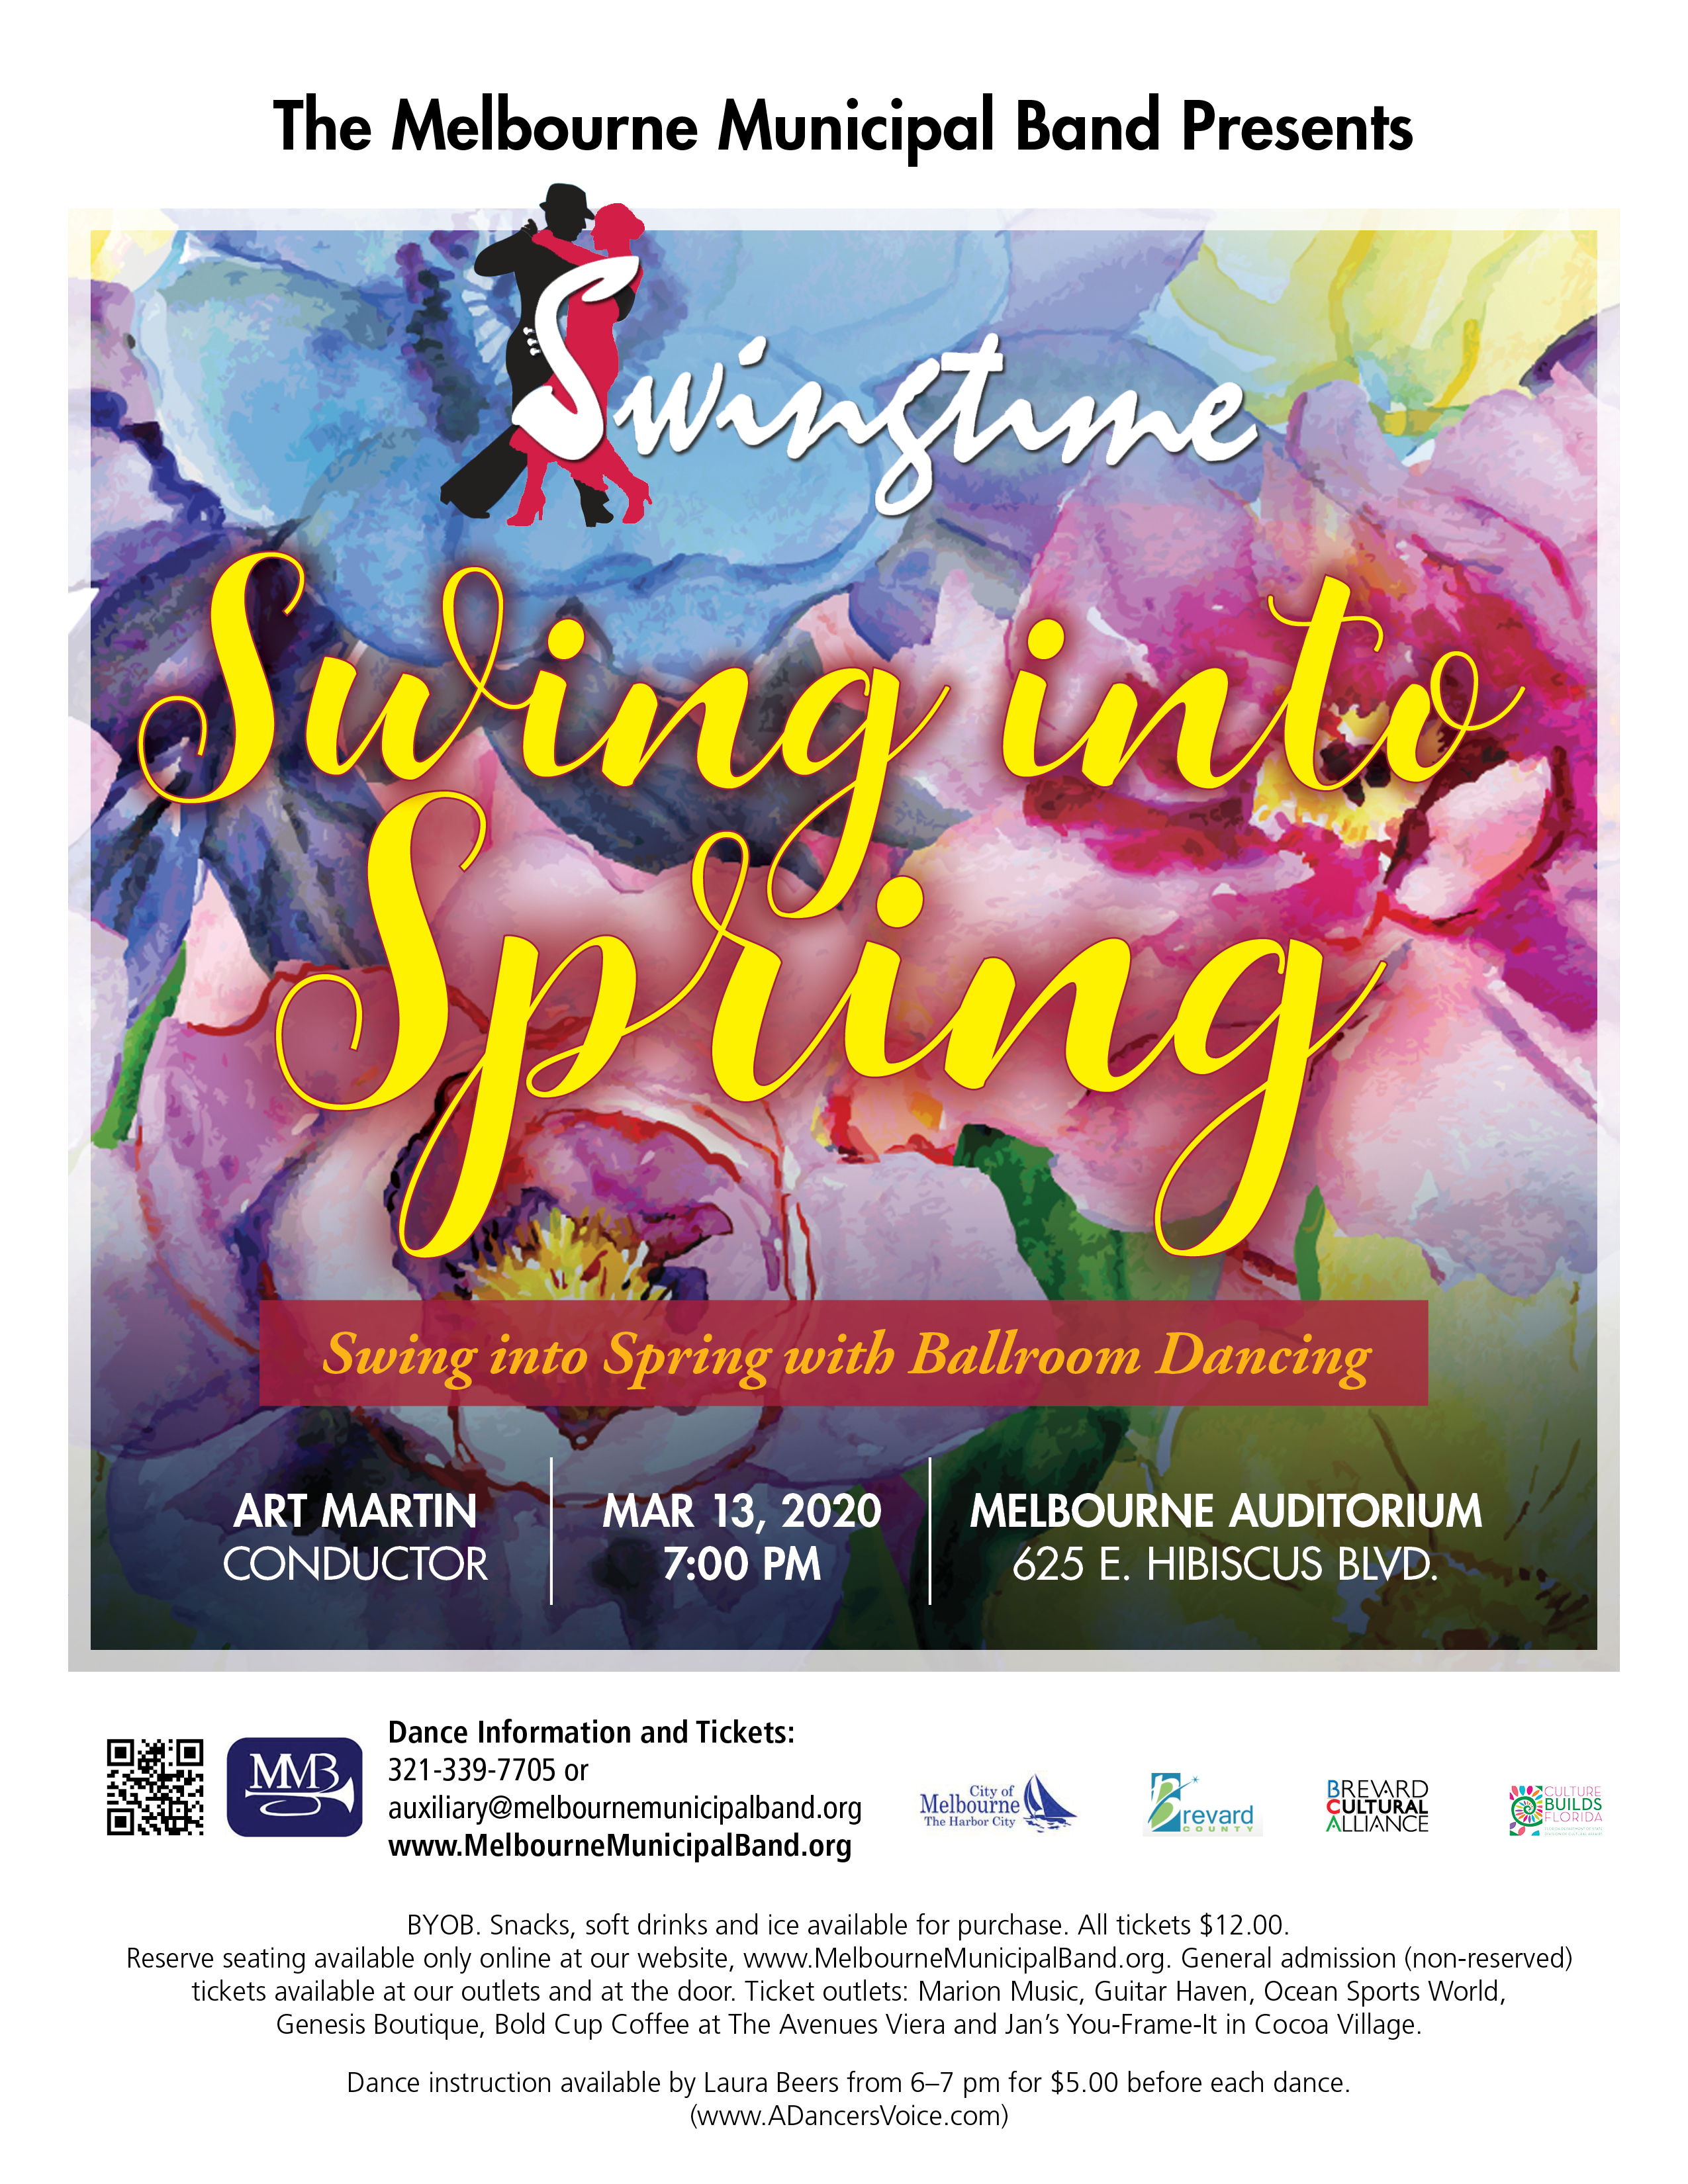 'Swing into Spring' presented by The Melbourne Municipal Band